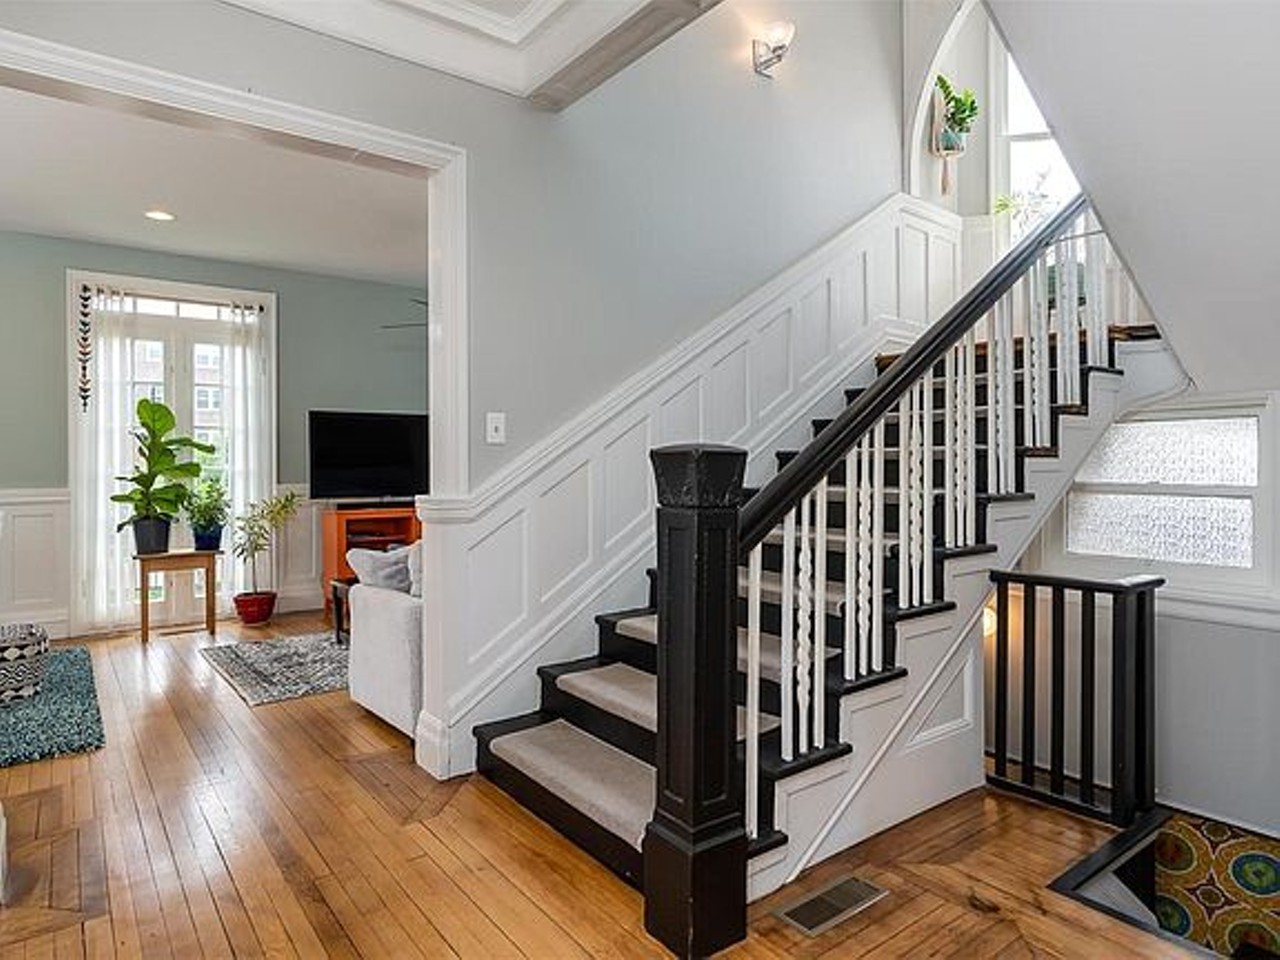 This Beautiful Home Was Designed by the Same Guy Who Designed Union Station [PHOTOS]